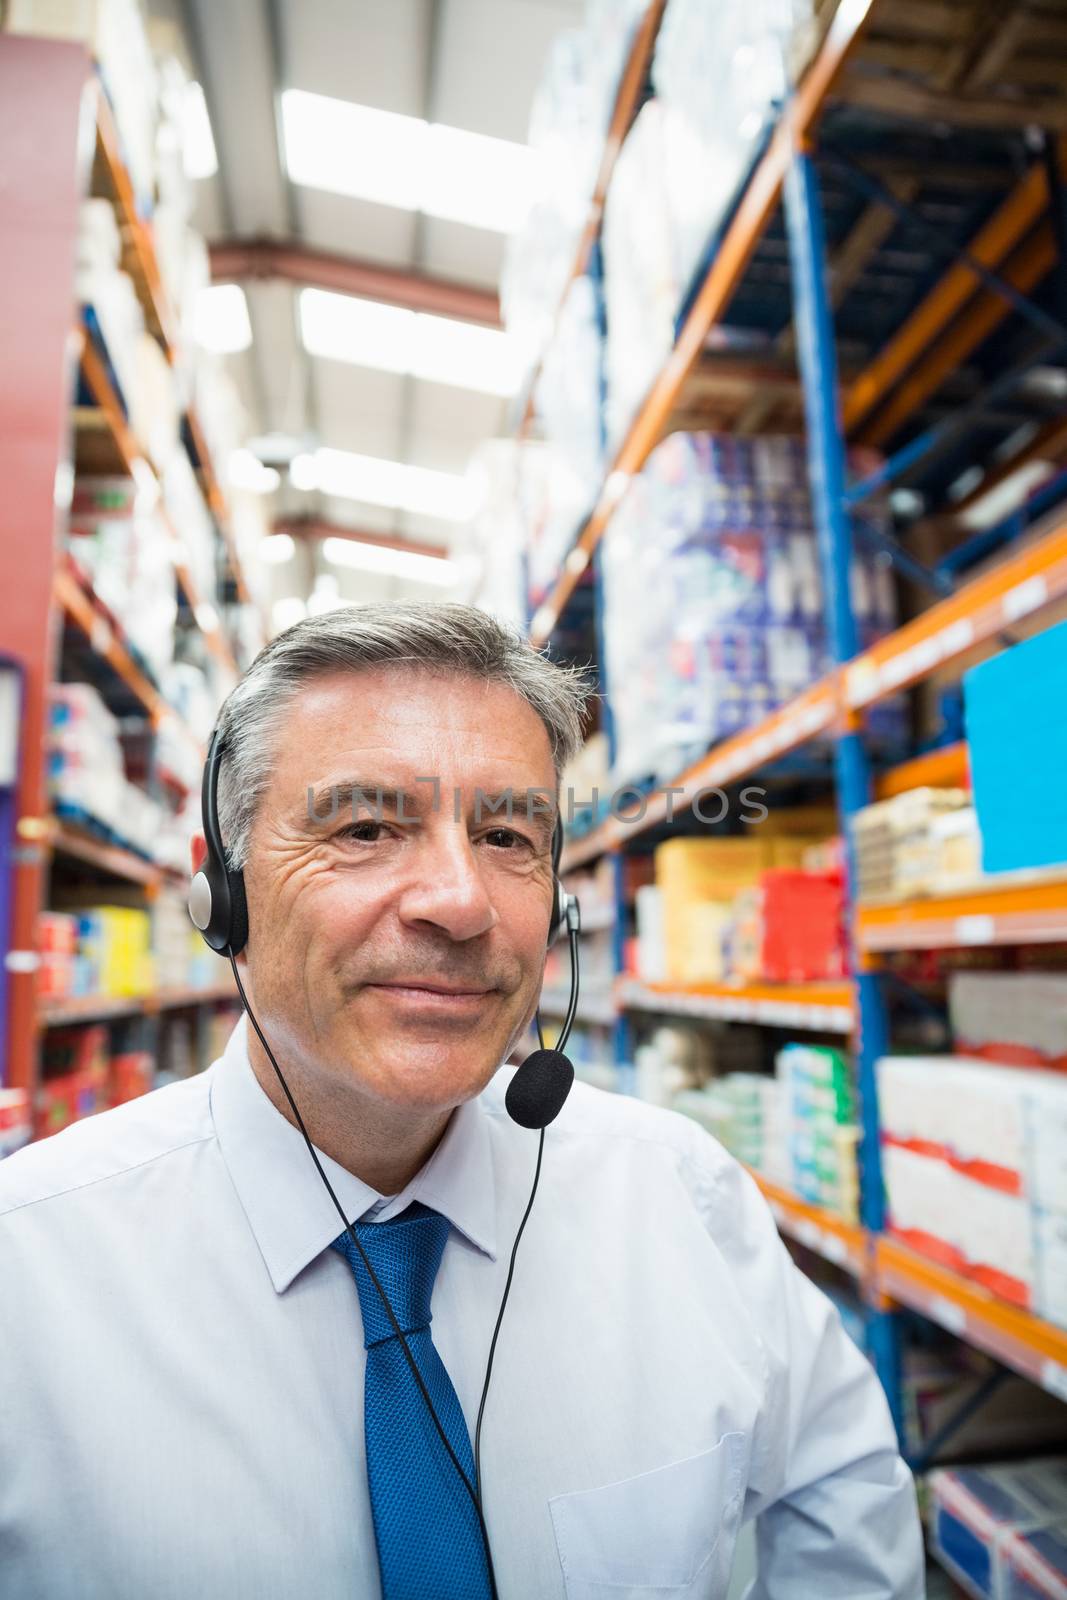 Warehouse manager giving orders on headset by Wavebreakmedia